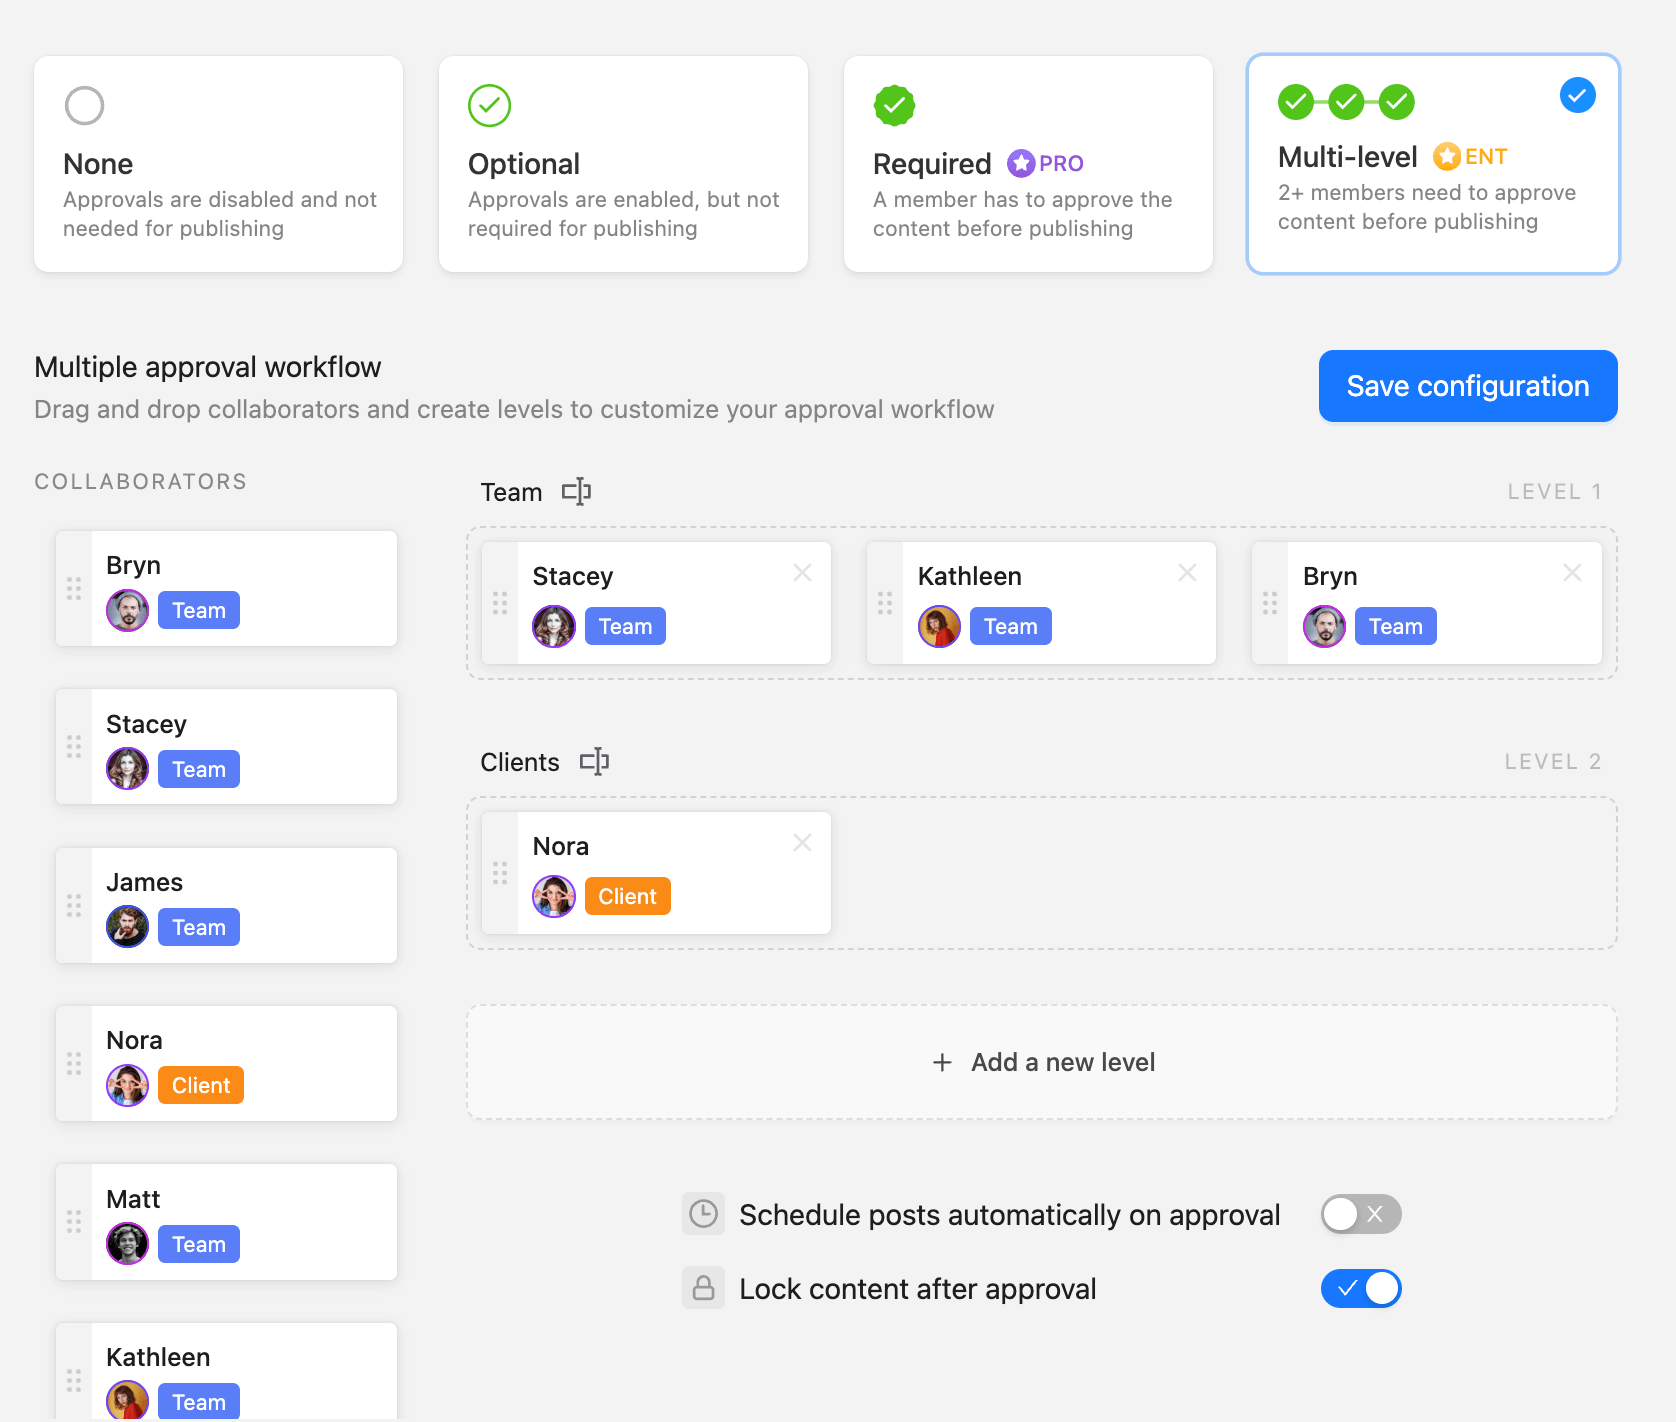 Visualization of multi-layer approval workflows in Planable, indicating content review stages